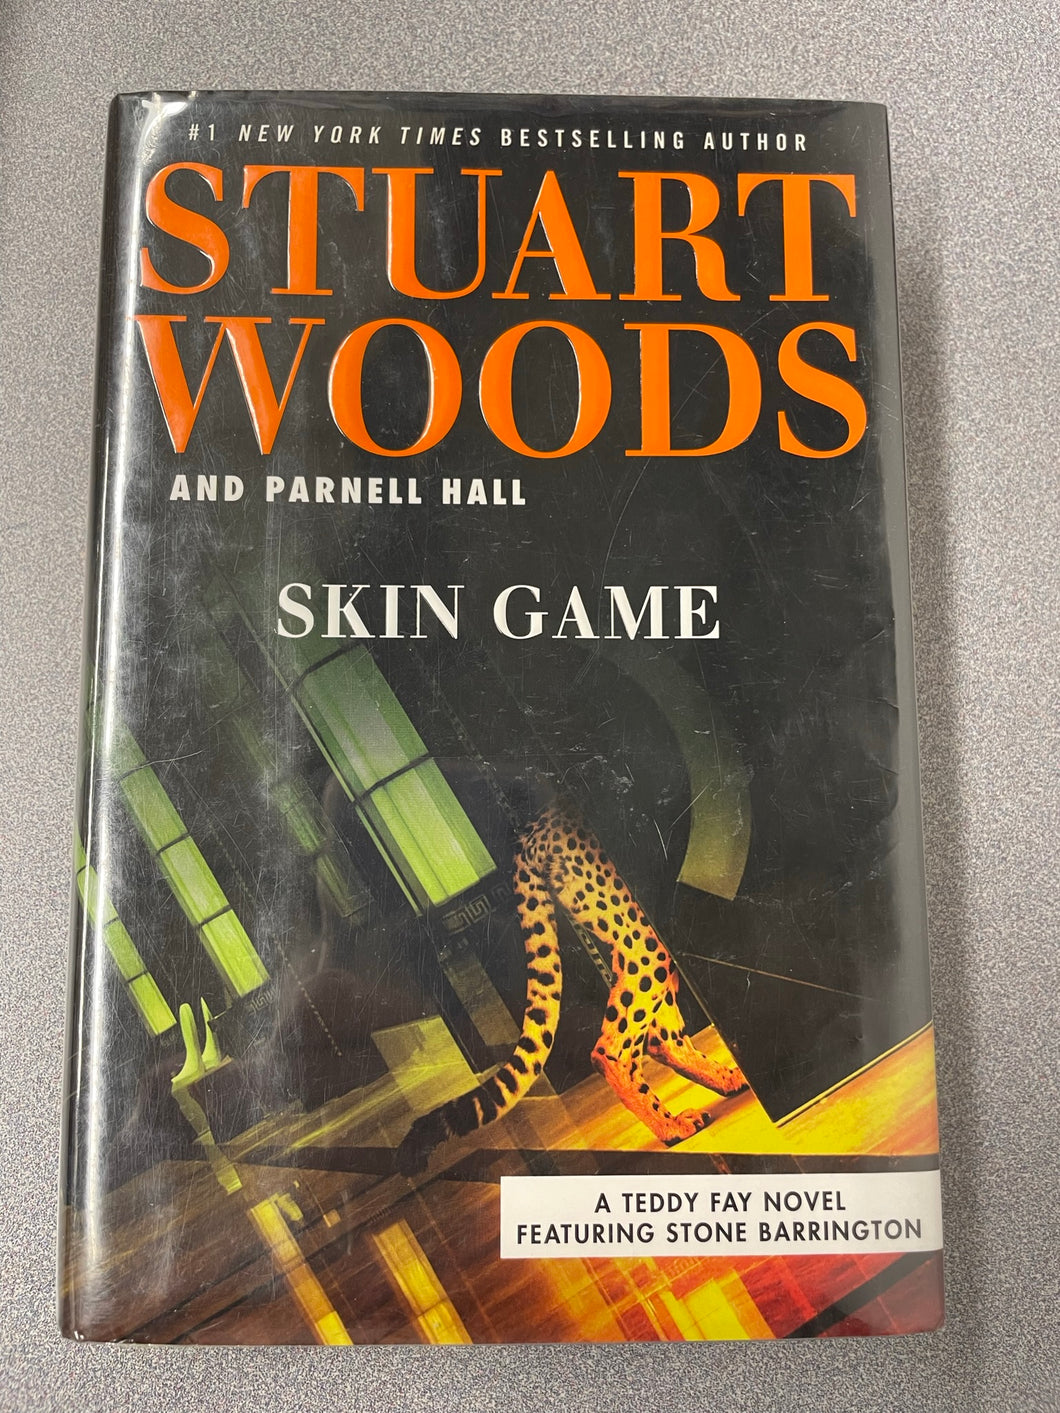 Woods, Stuart and Parnell Hall, Skin Game [2019] RBS 2/23